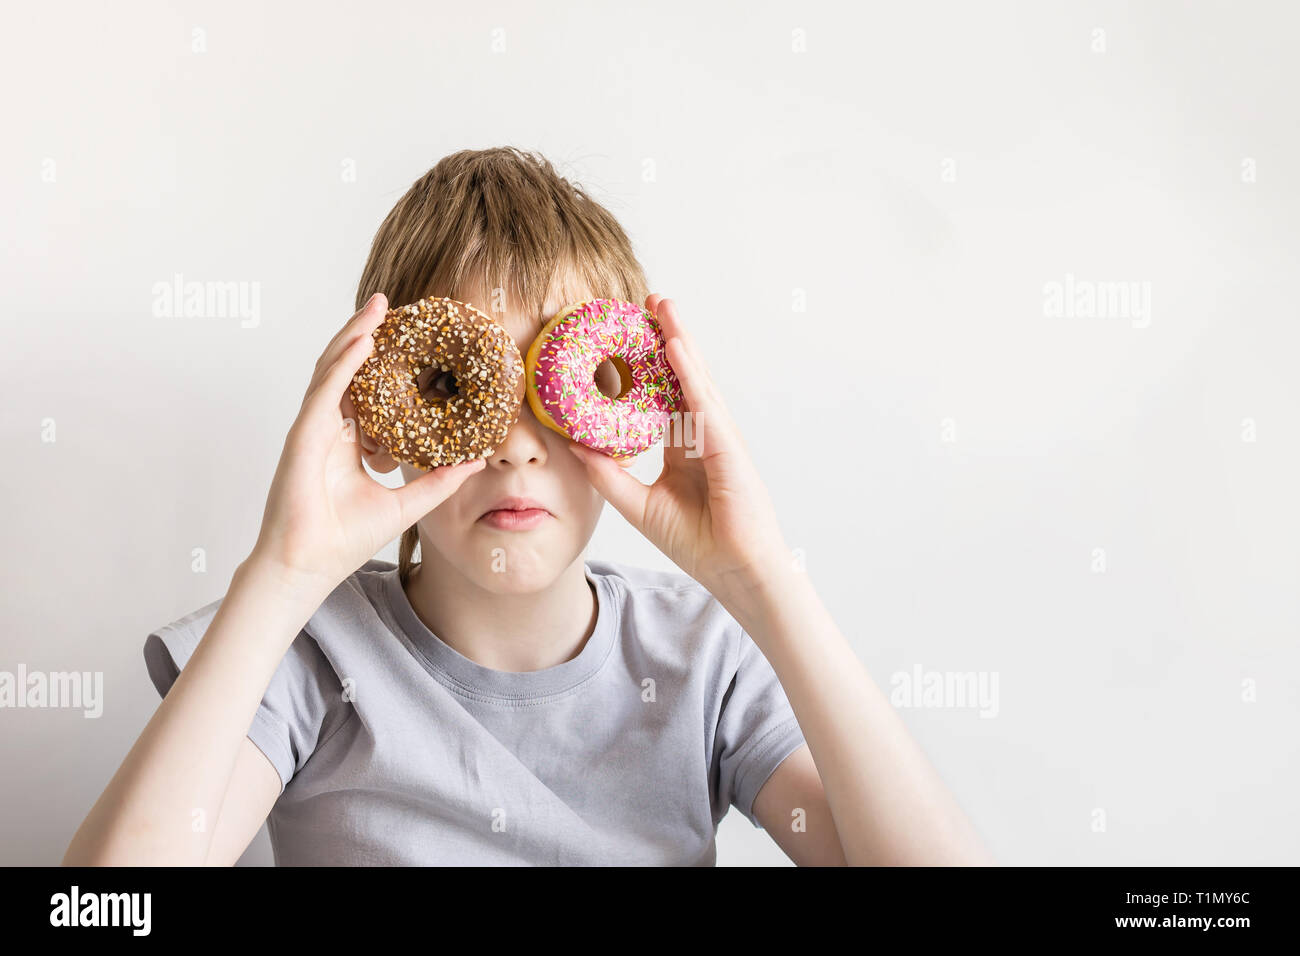 Teen boy looks into donut holes and funny grimaces. Stock Photo